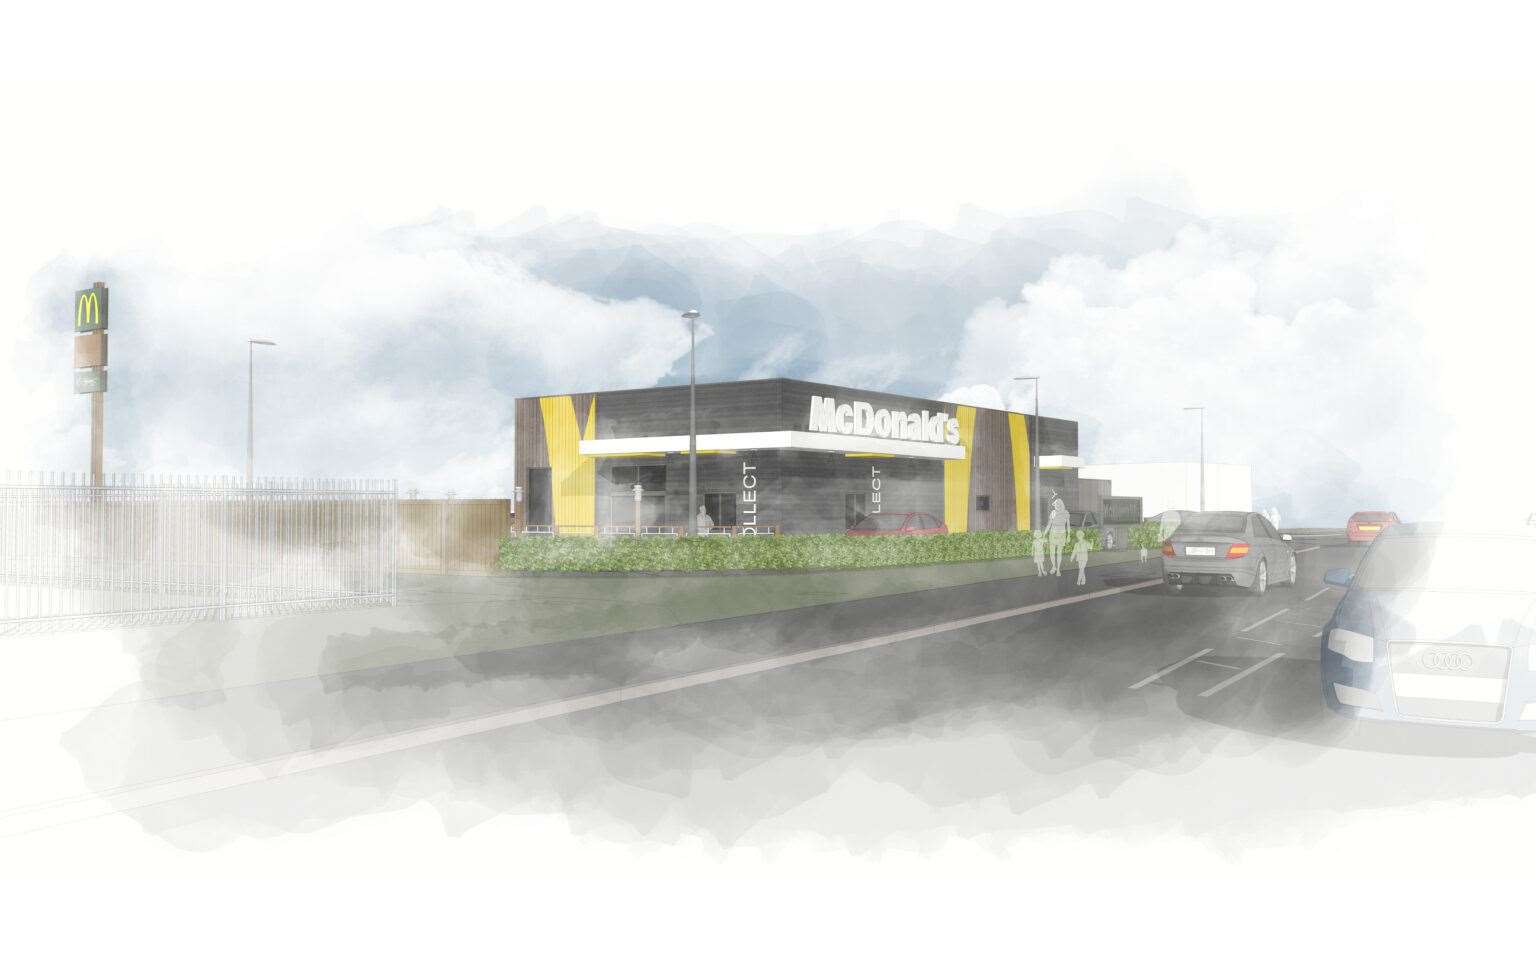 Architects impressions of the new McDonald's for Ellon